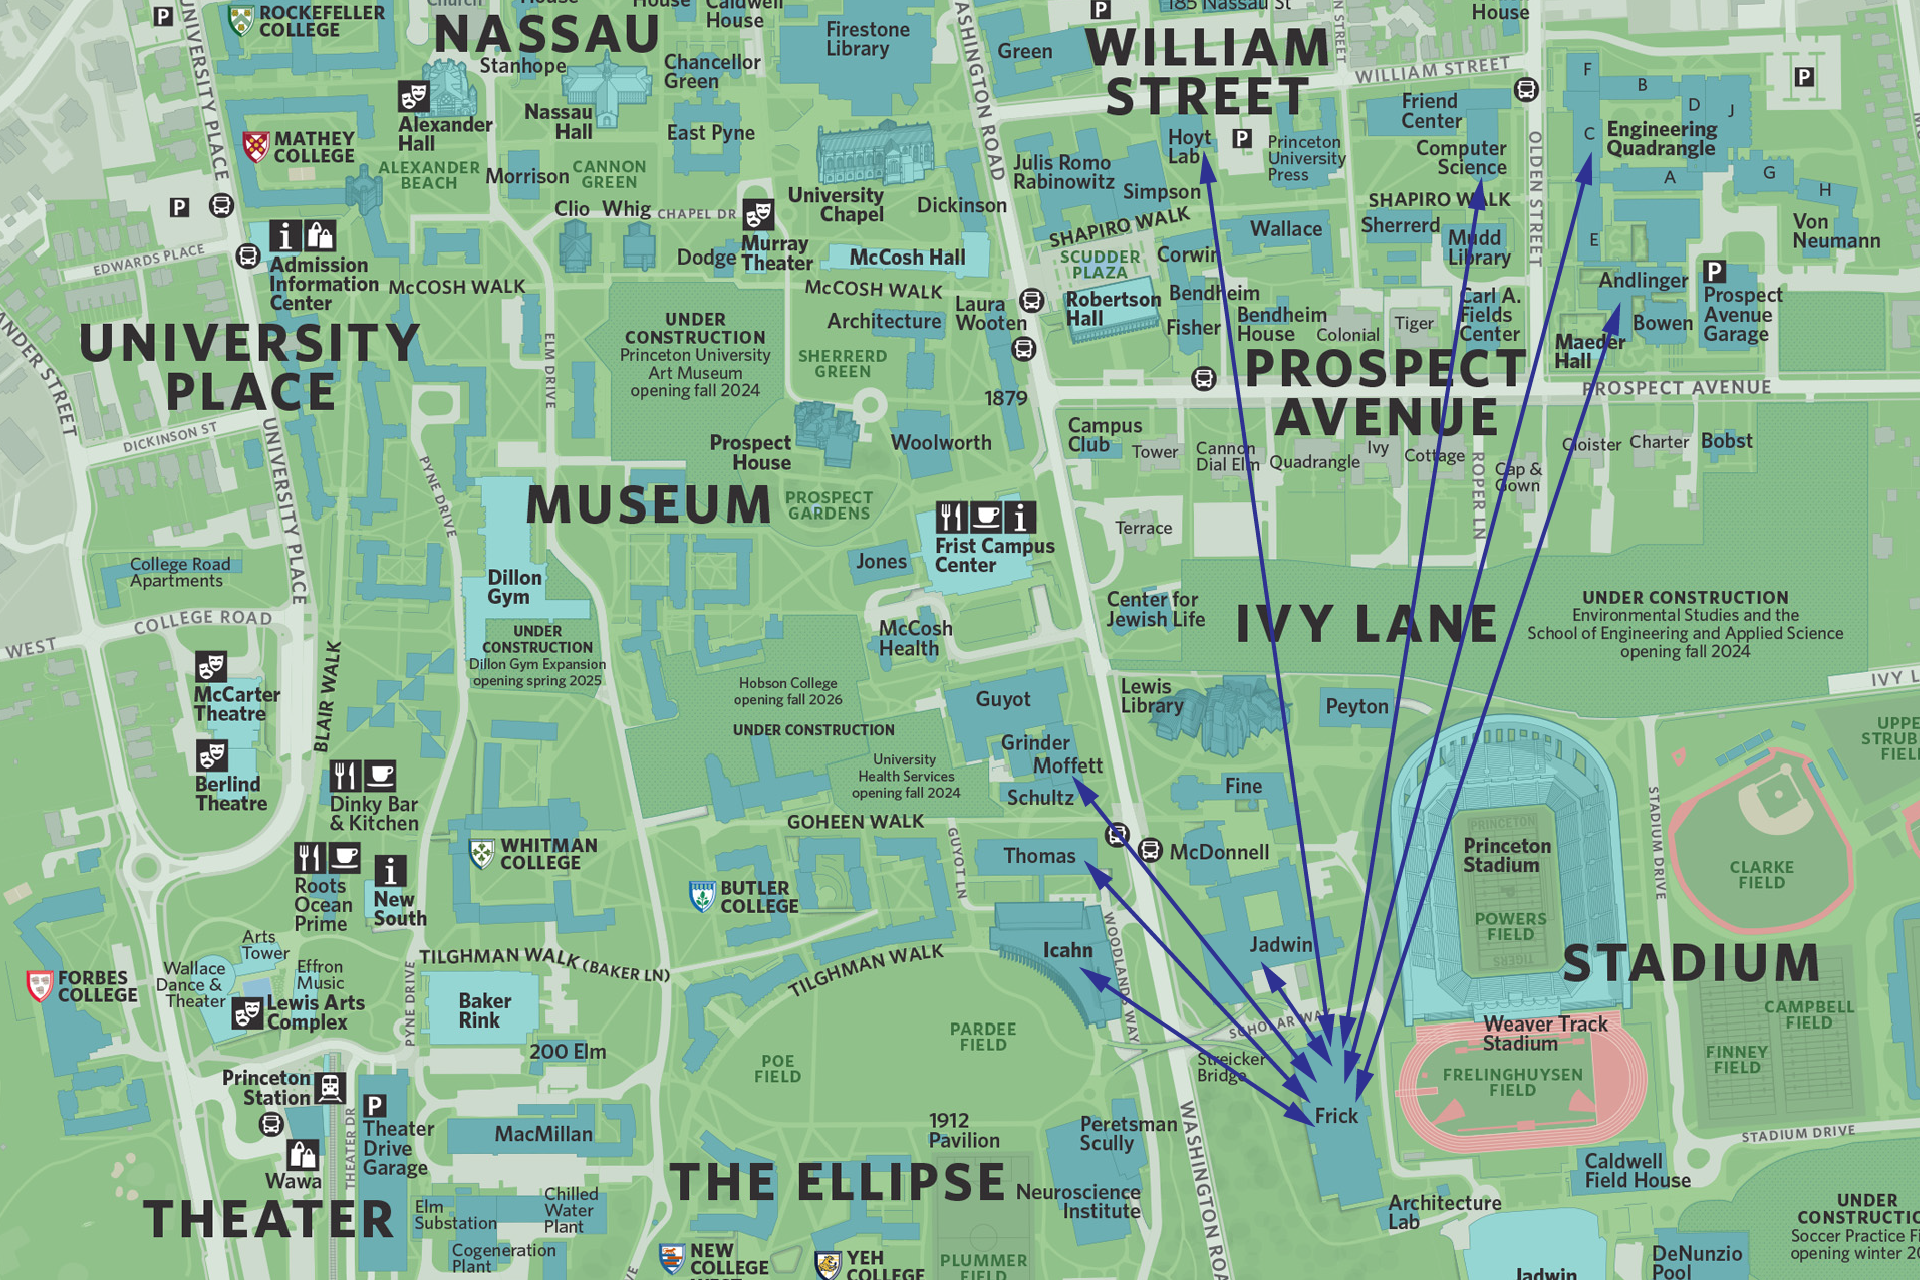 Map of Princeton University campus depicting connections between Chemistry and other departments.